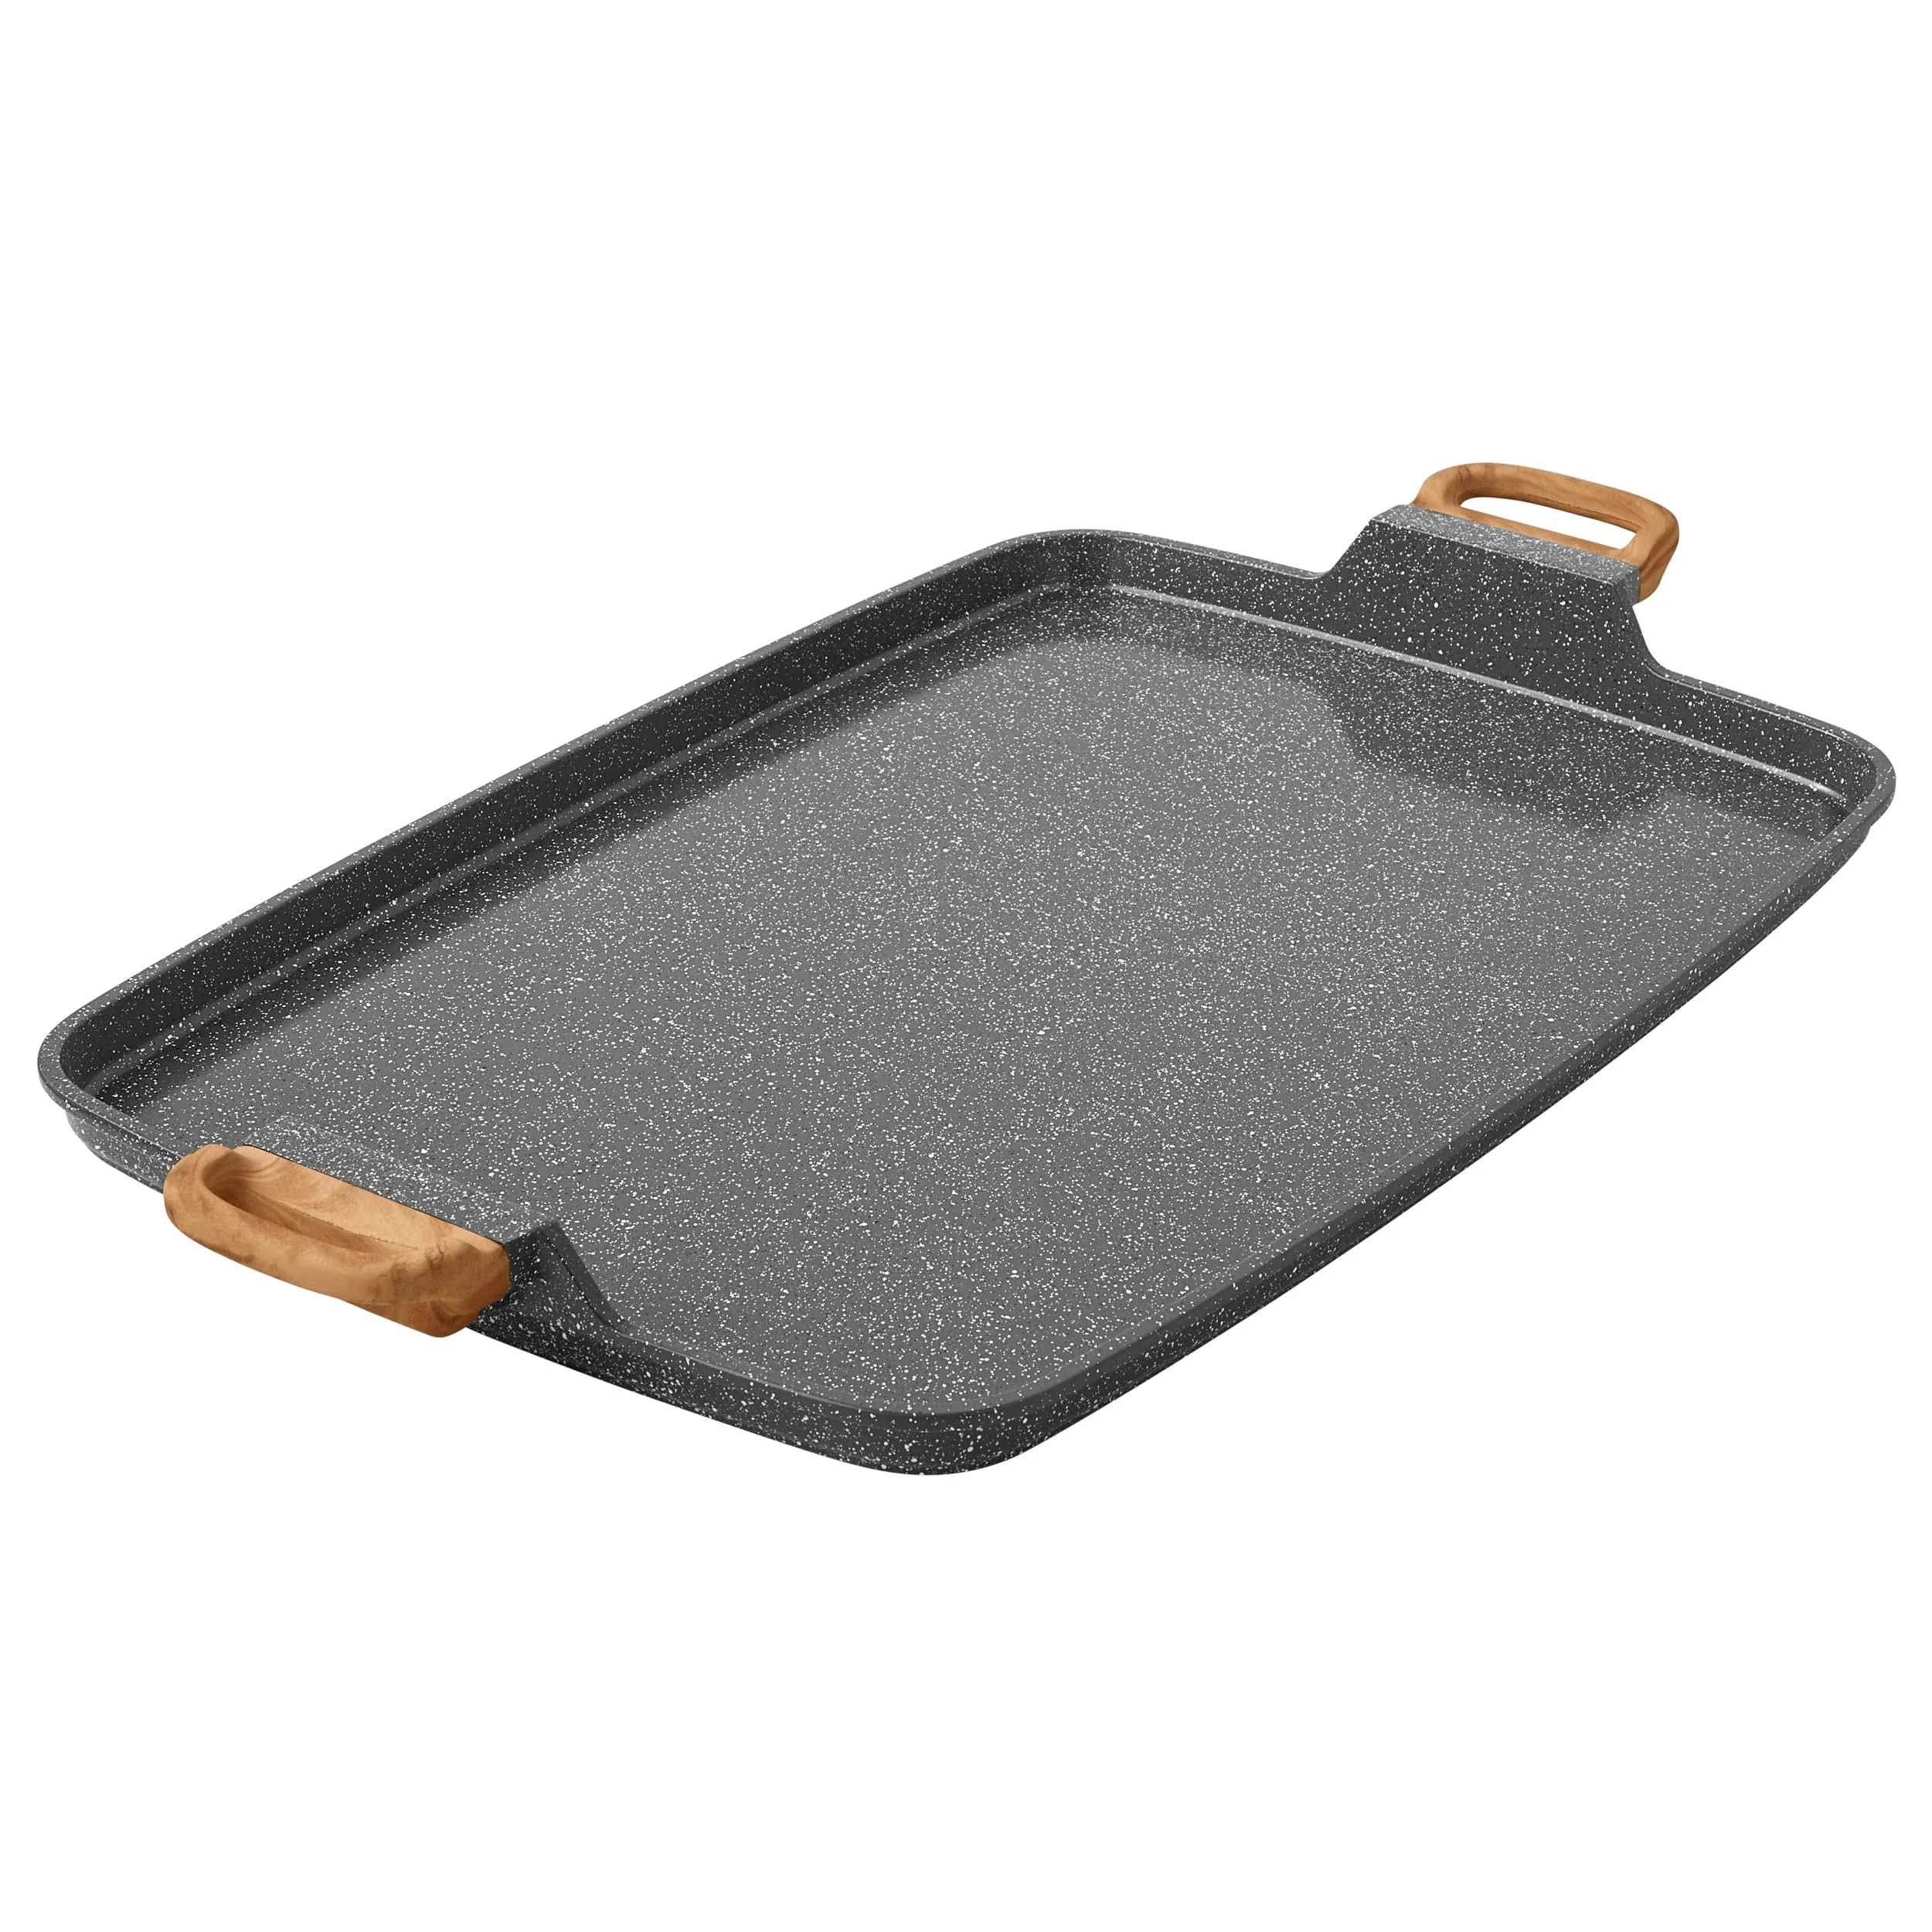 The Pioneer Woman Vintage-Inspired Cast Aluminum Double Griddle | Image